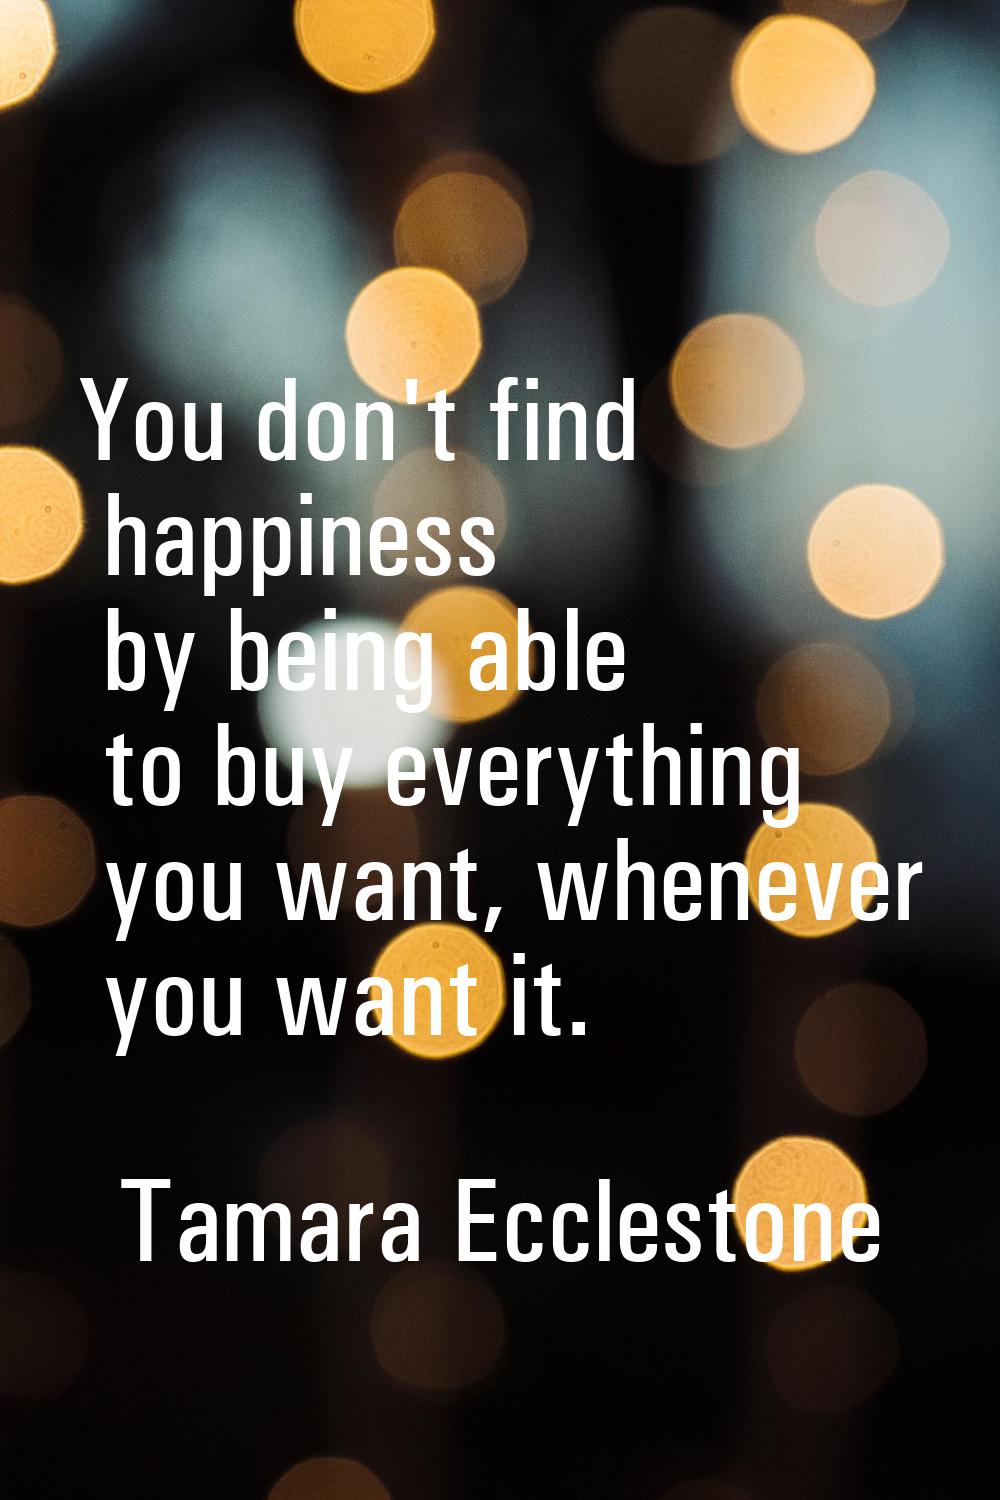 You don't find happiness by being able to buy everything you want, whenever you want it.